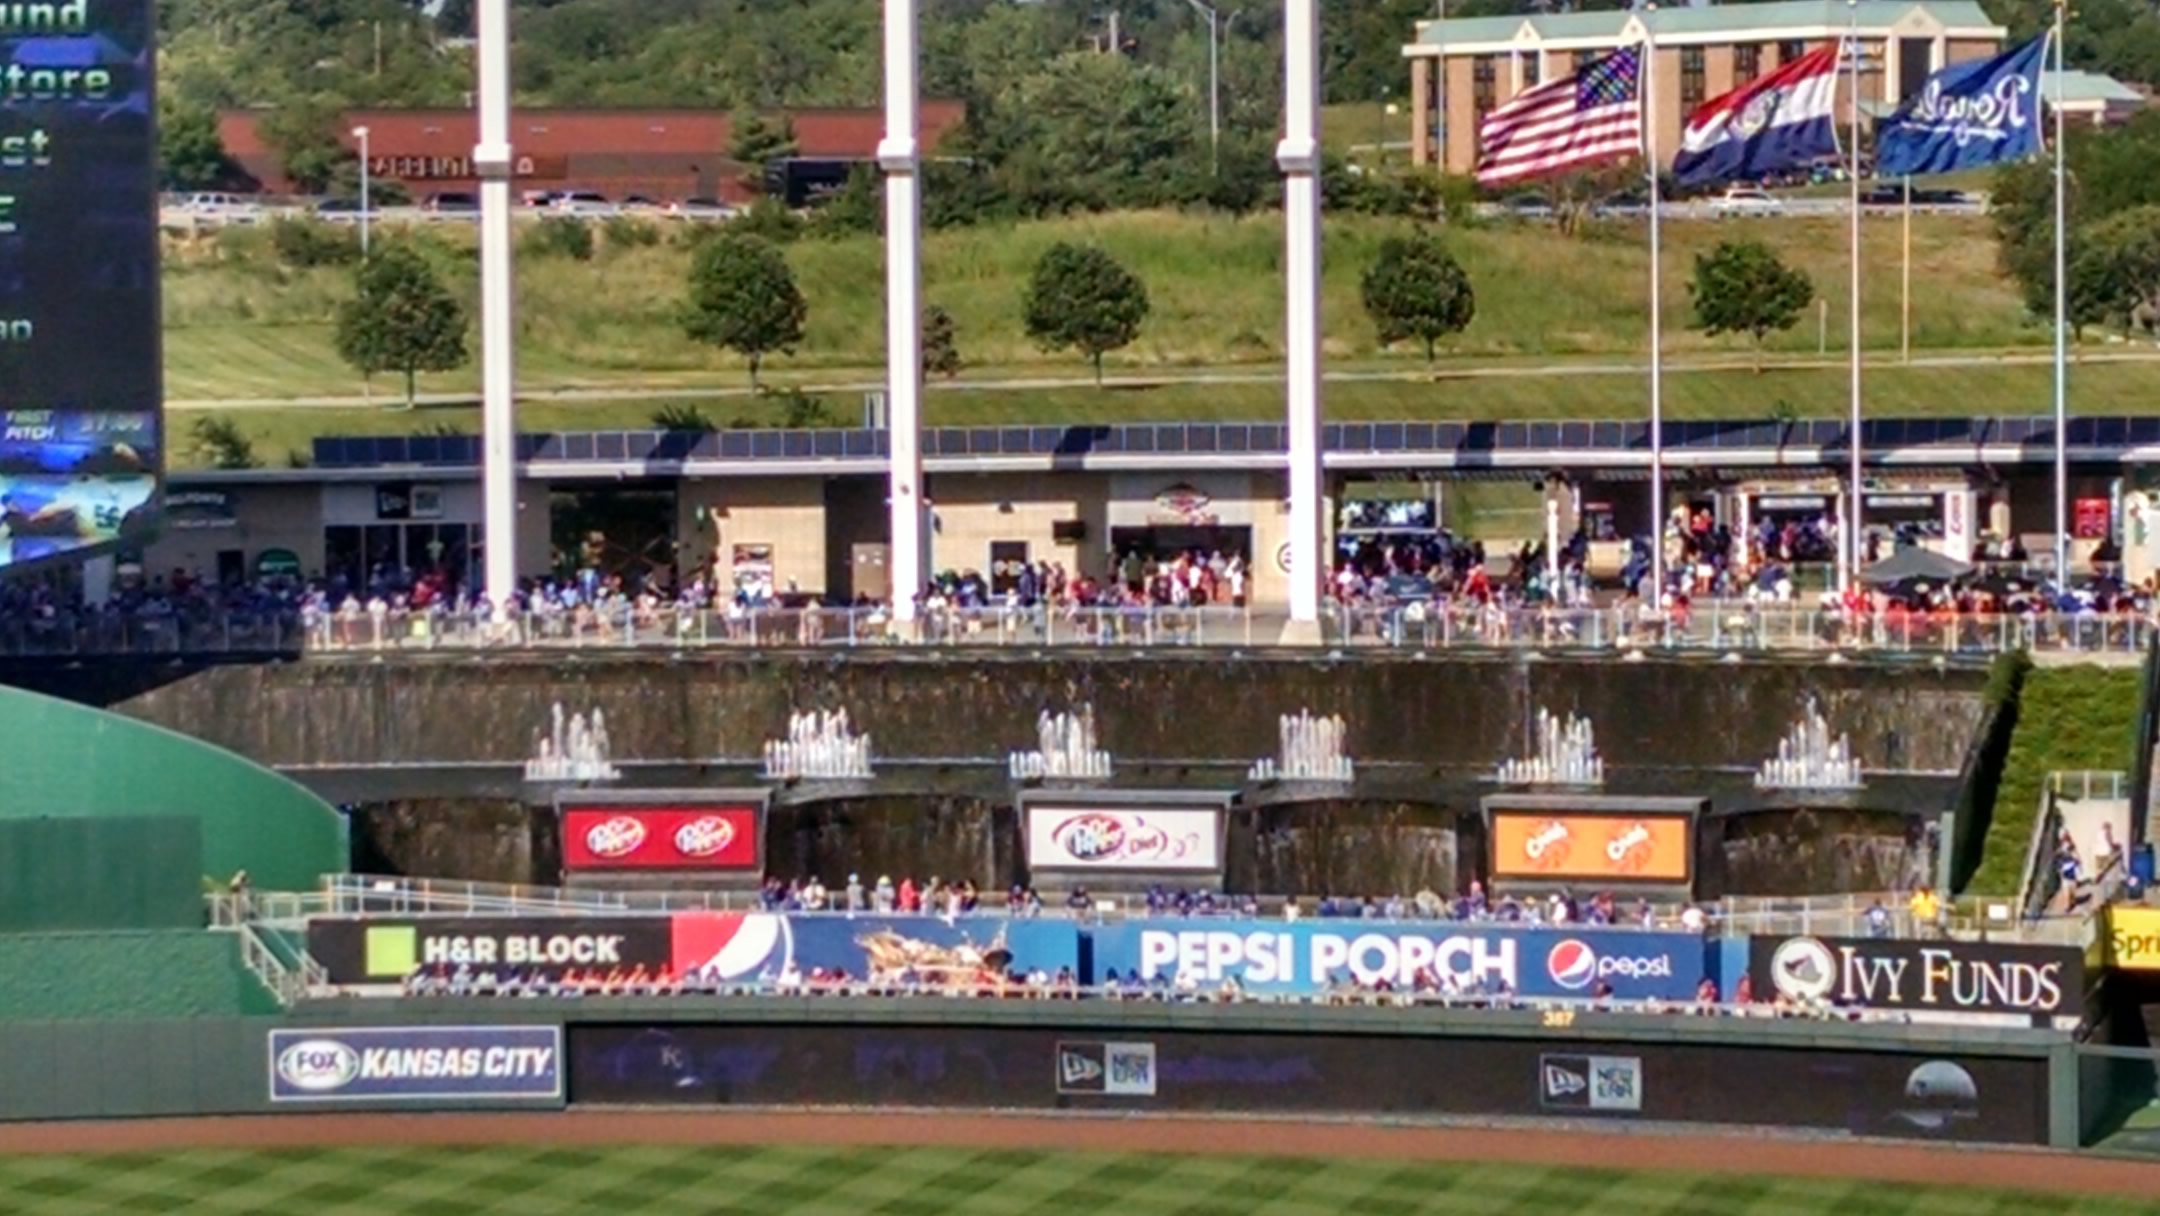 Standing Room Only Tickets at Kauffman Stadium 